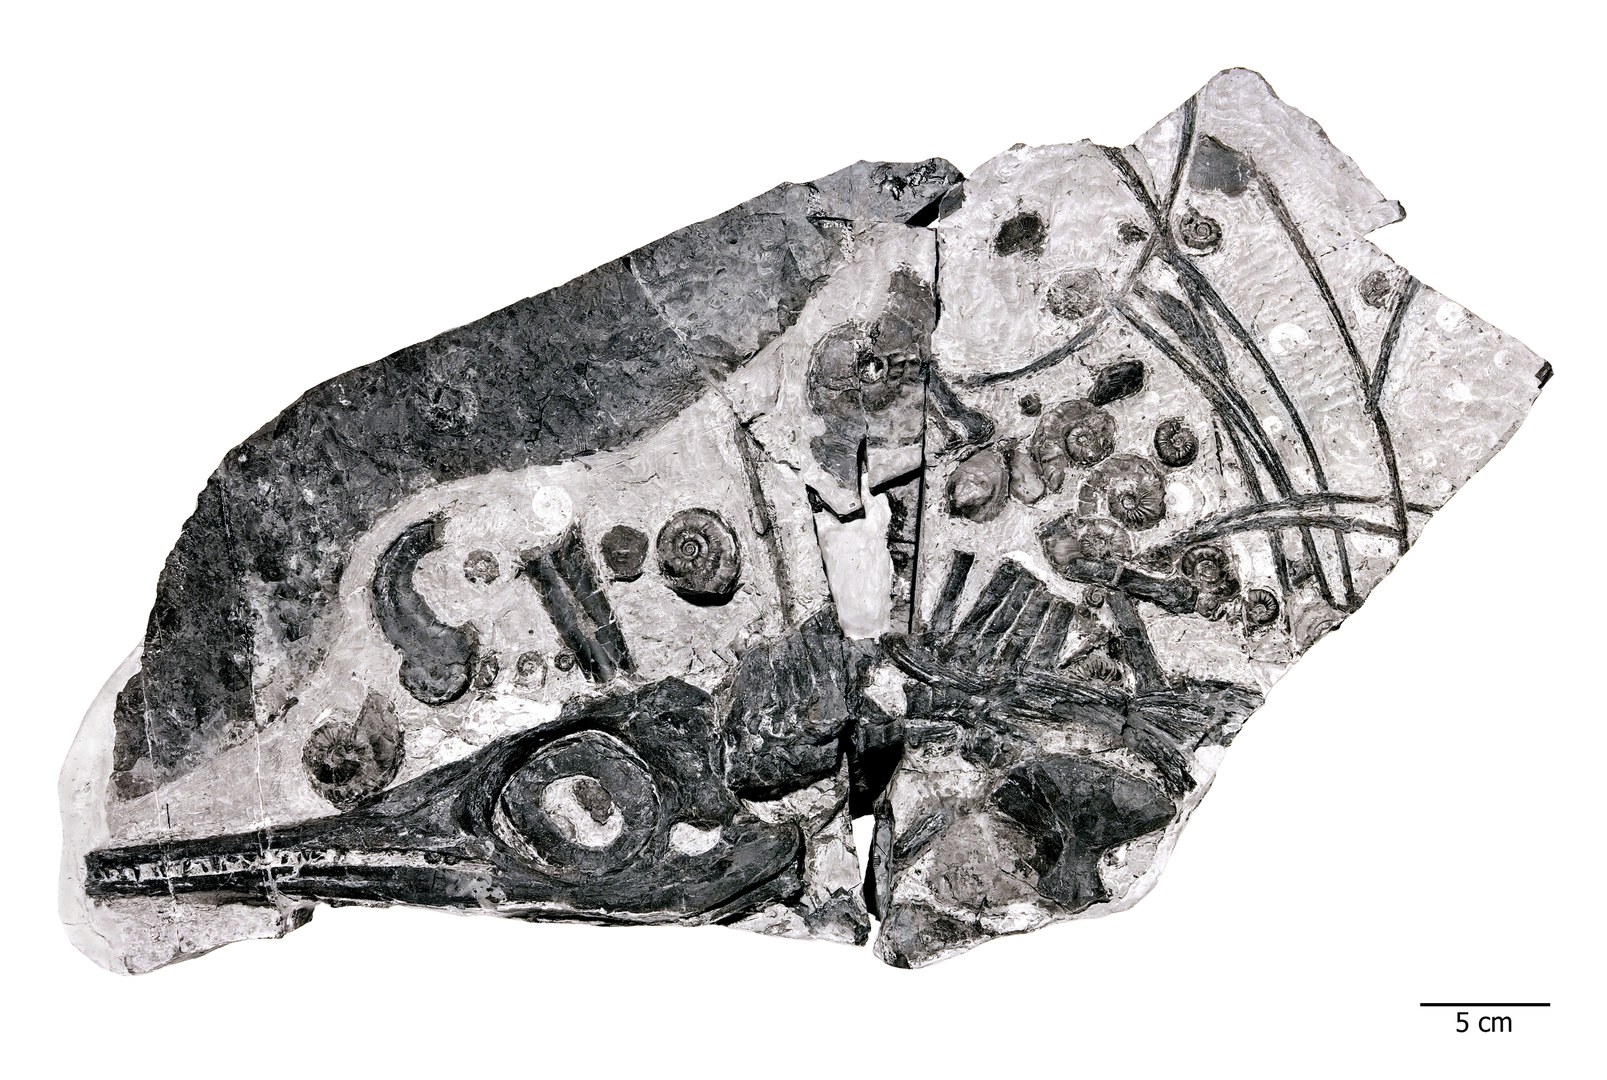 An ichthyosaur fossil surrounded by the shells of ammonites, the food source that possibly fueled their growth to huge.